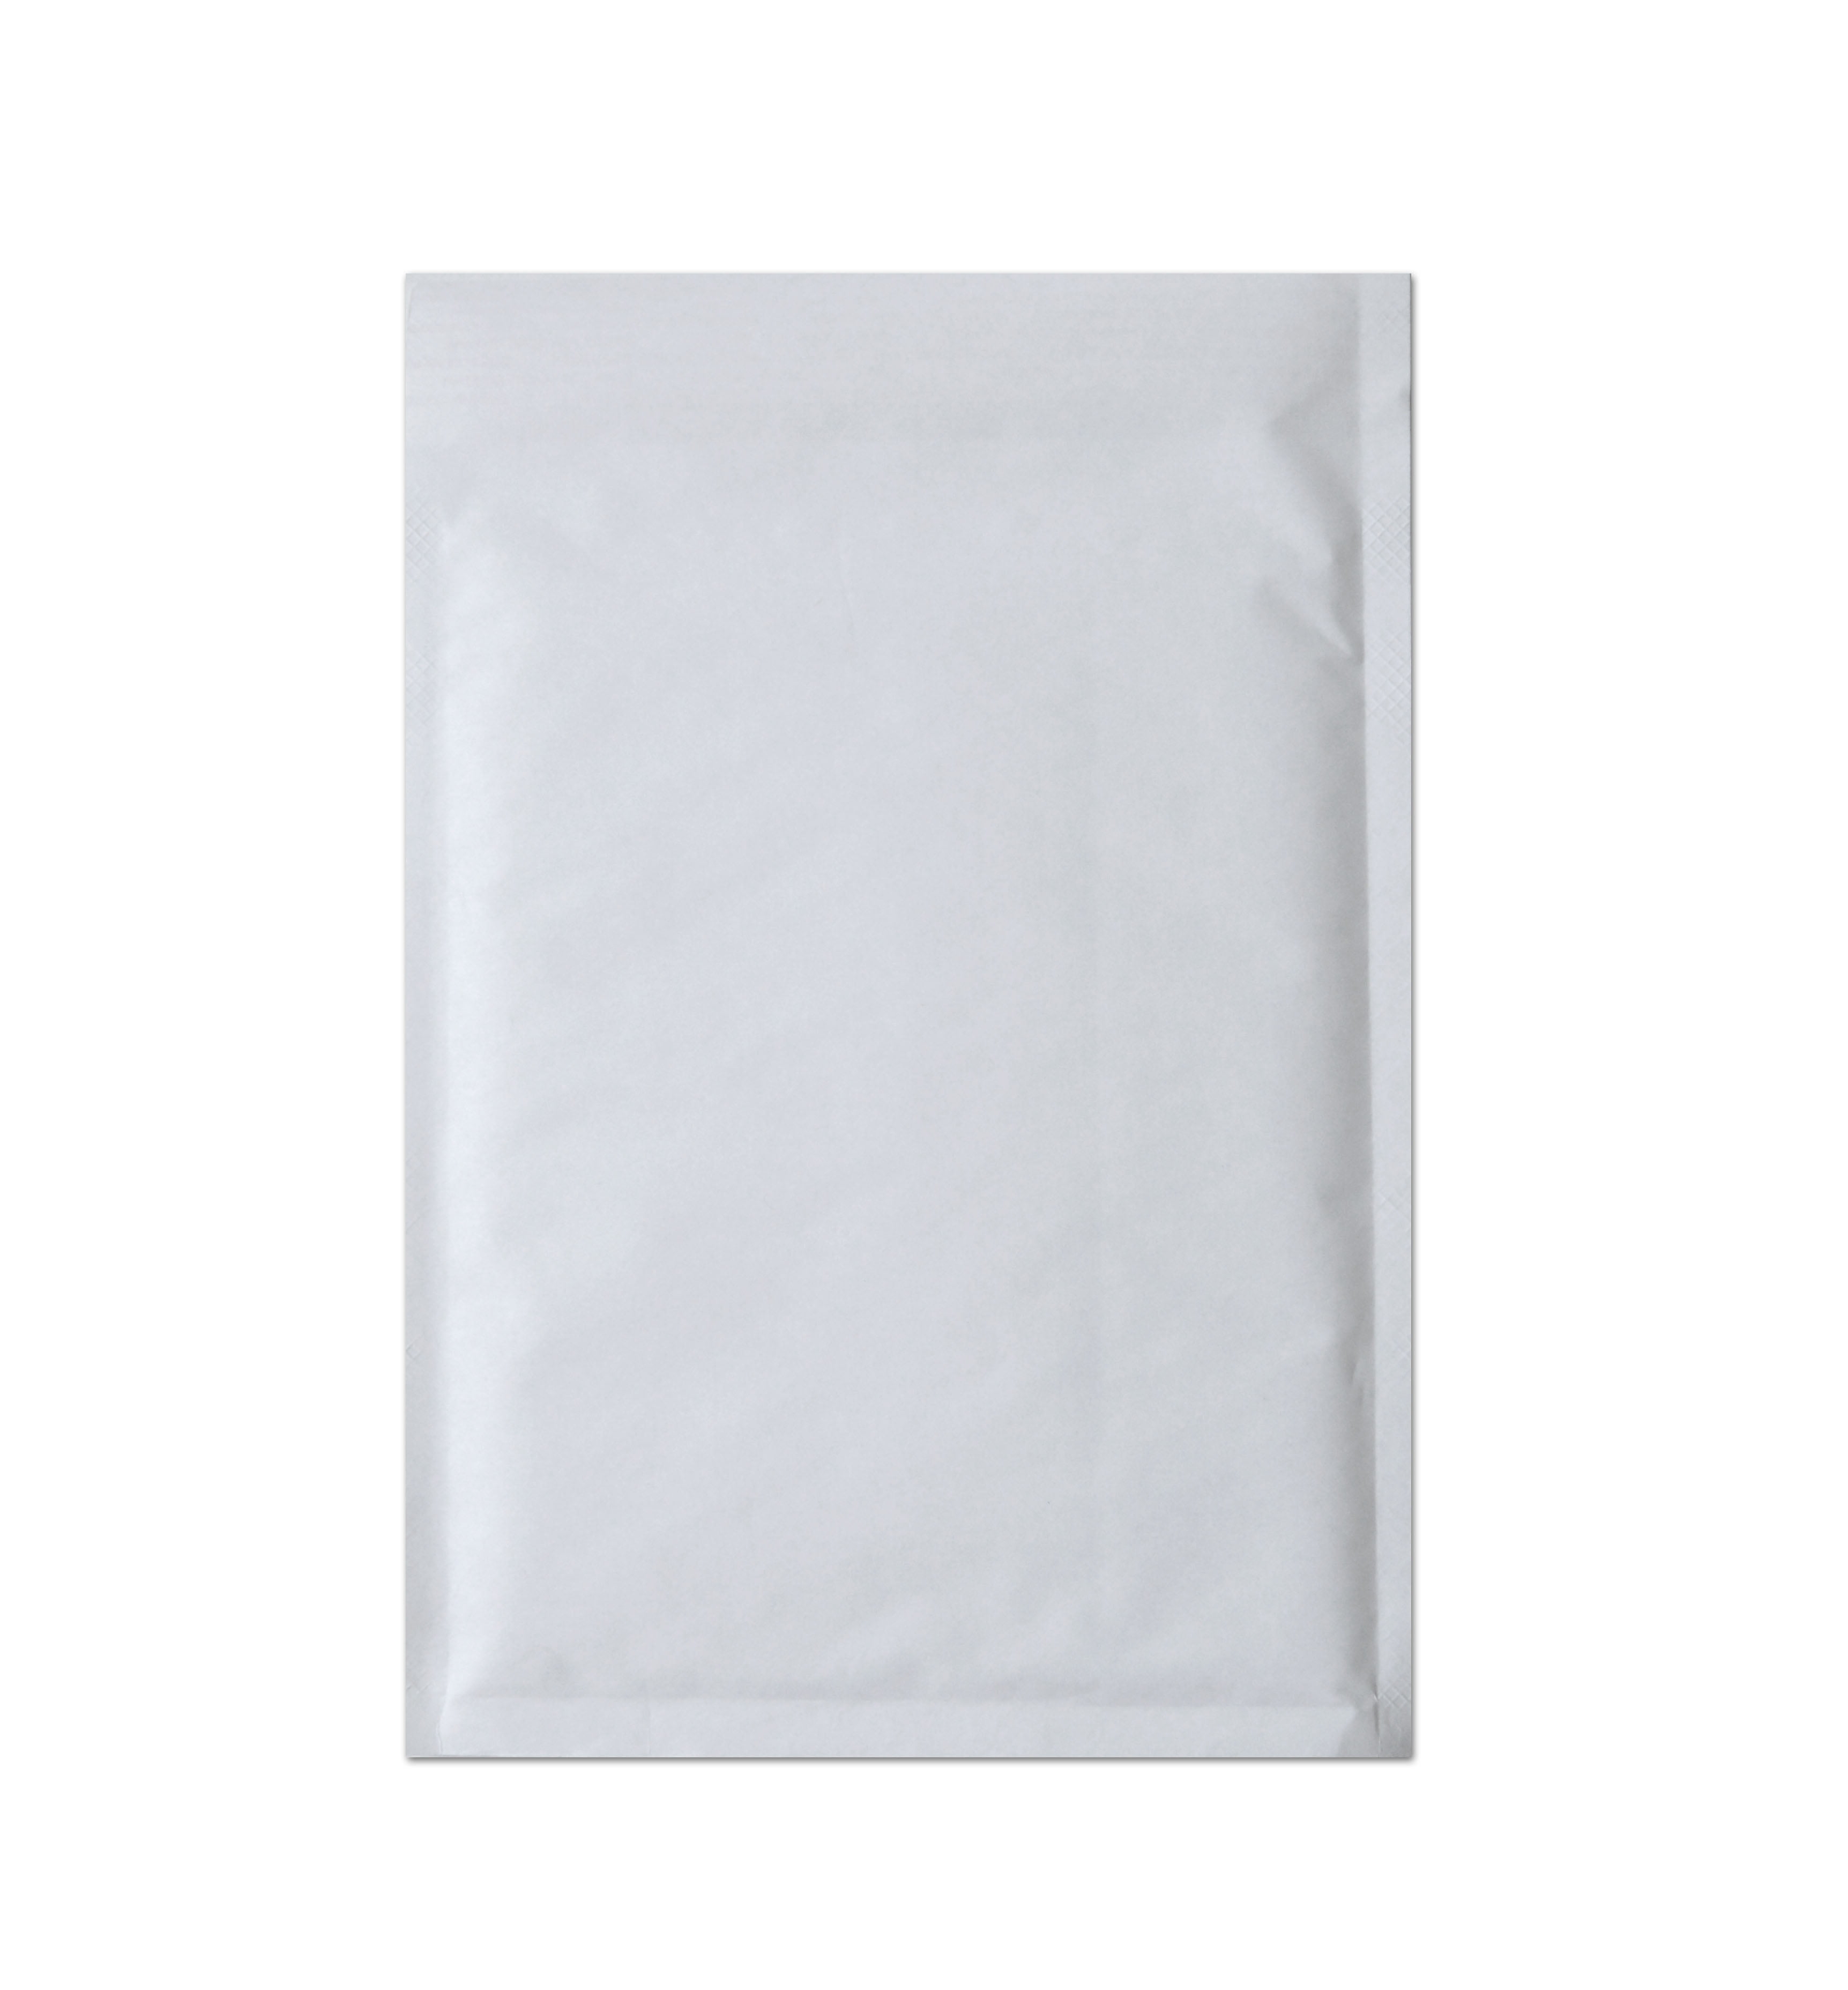 10" x 15.5" Bubble Out Bags Padded Envelopes Bags Self Sealing 1000 Pieces